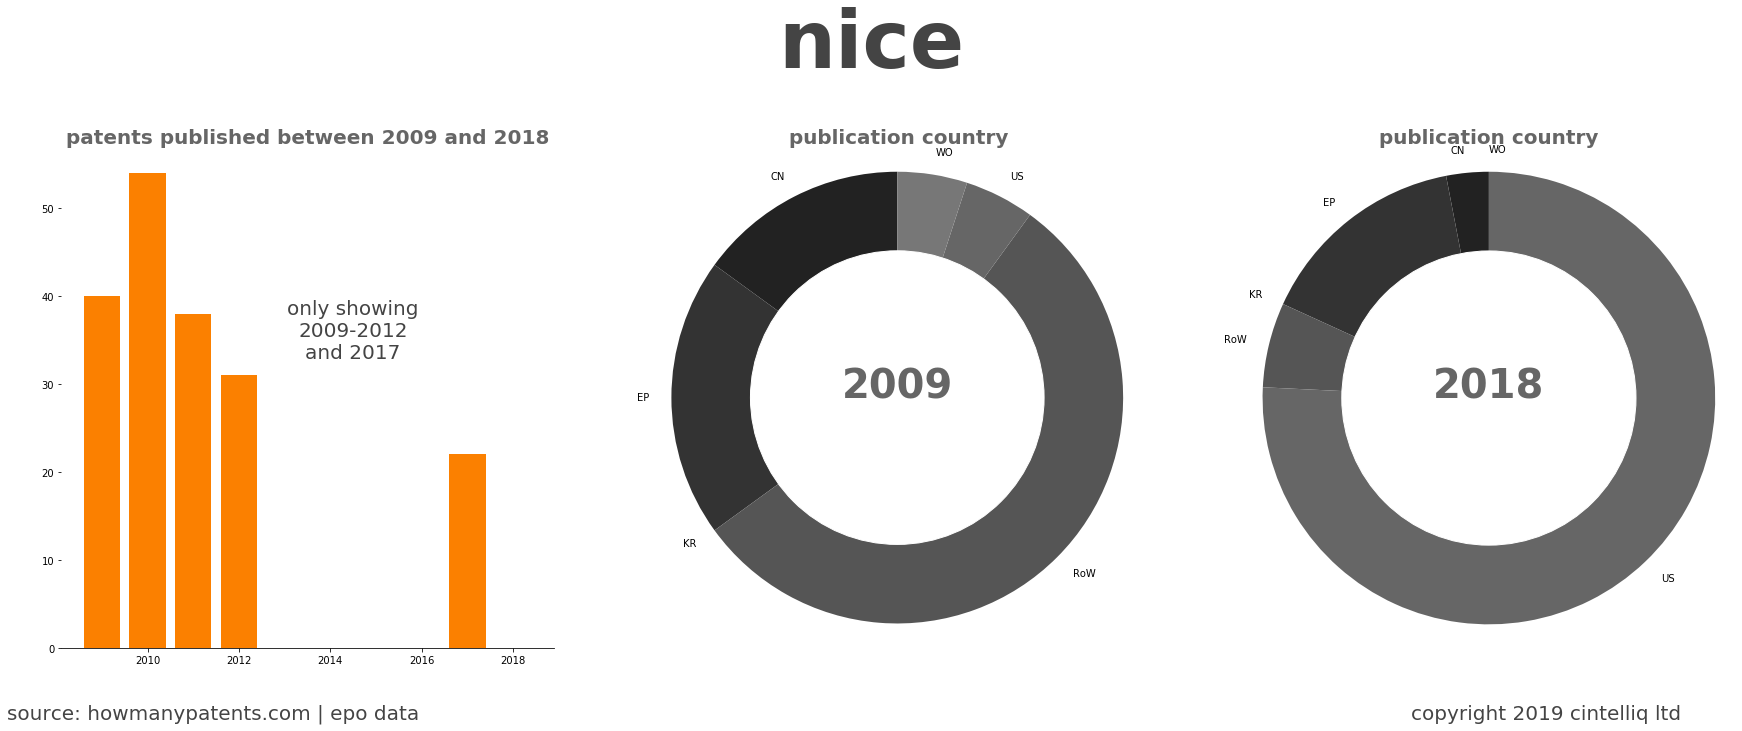 summary of patents for Nice